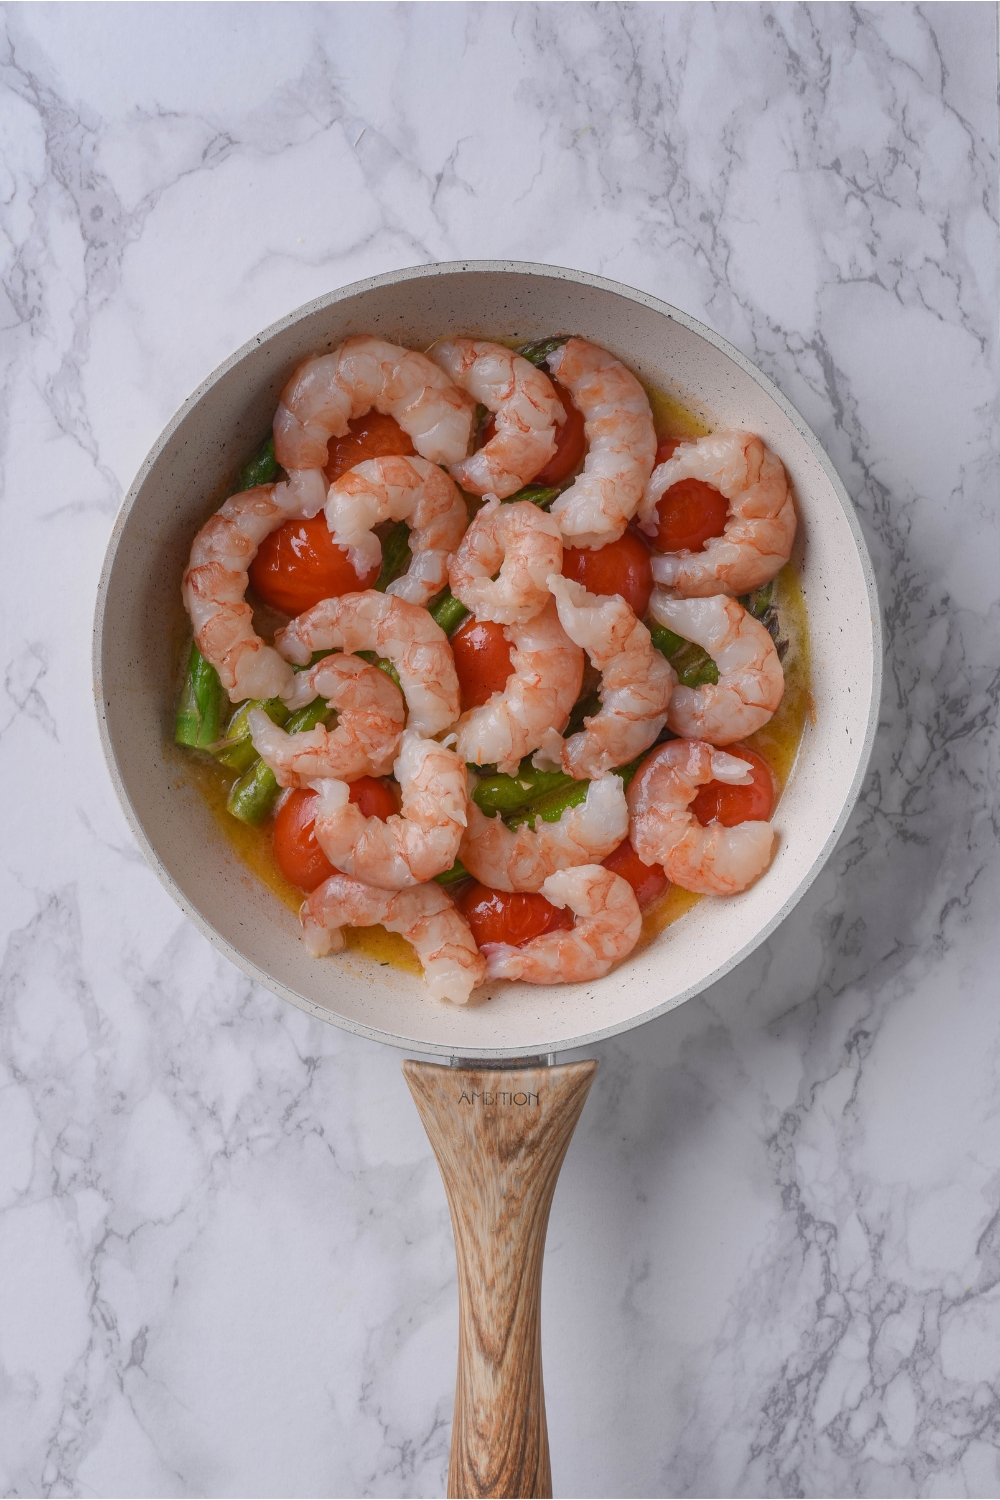 A grey skillet filled with melted butter, asparagus, cherry tomatoes, and raw shrimp on top.